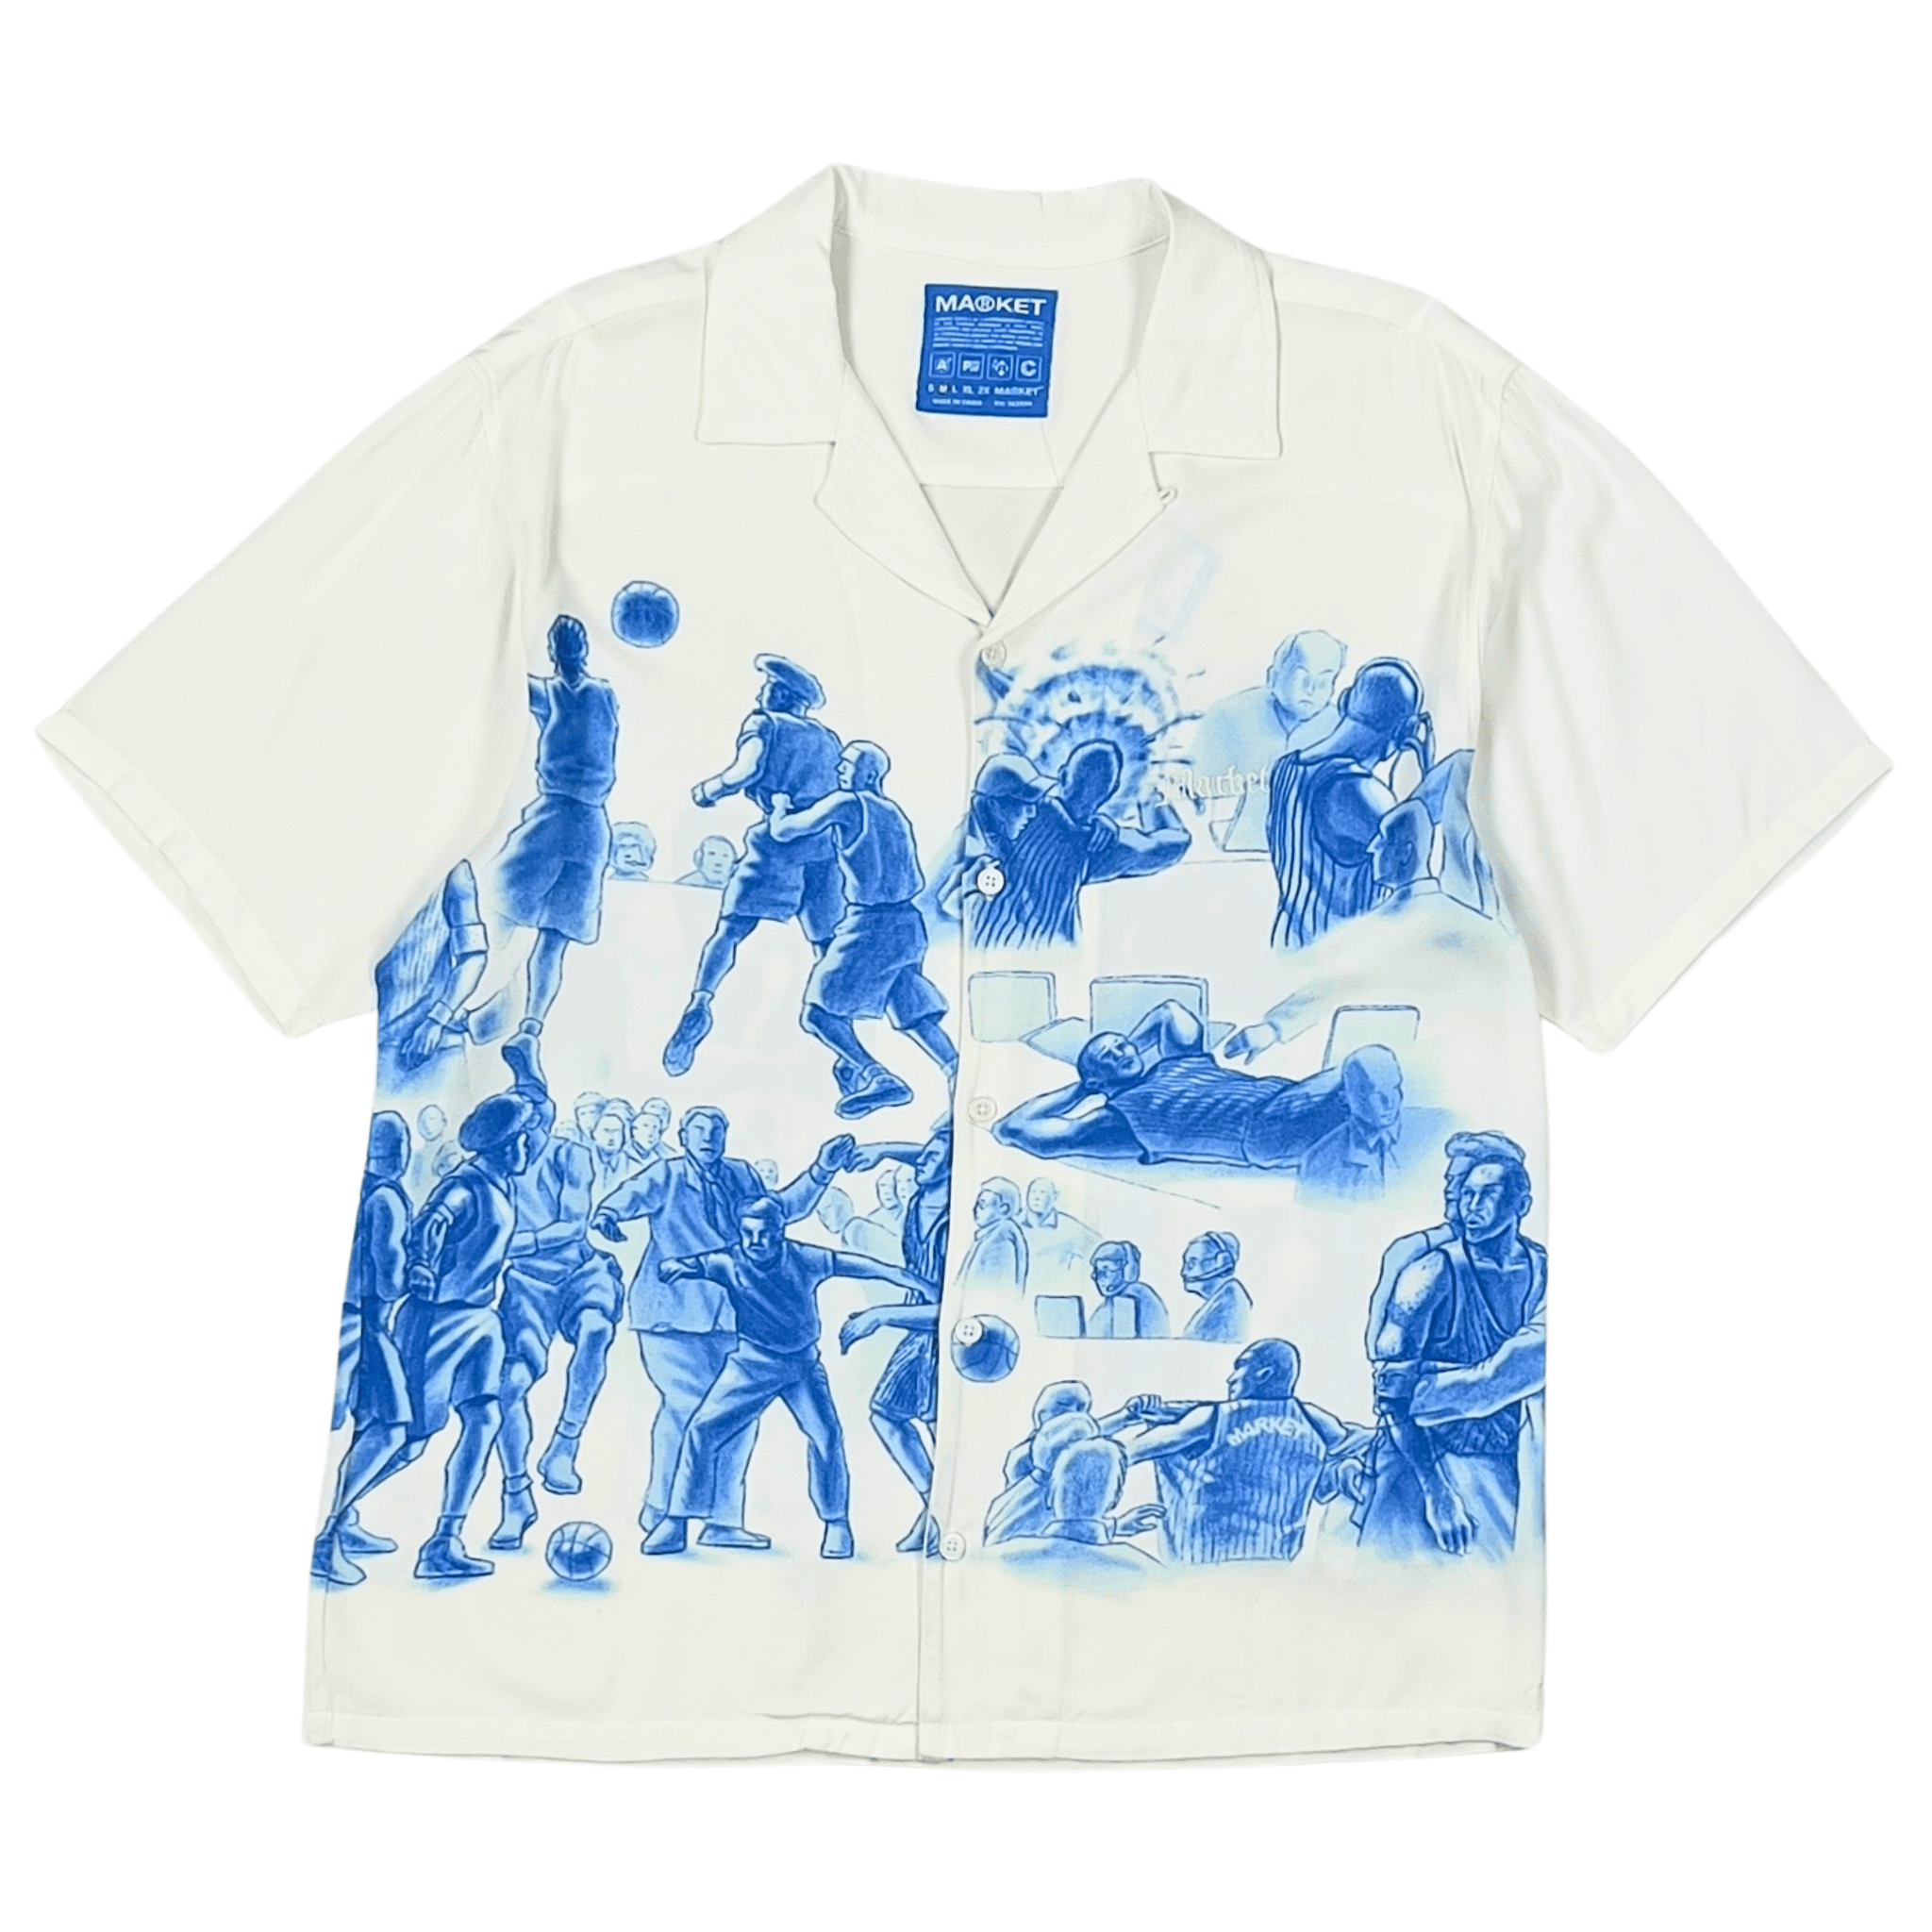 Malice Palace Camp Shirt in white and blue - MARKET - State Of Flux